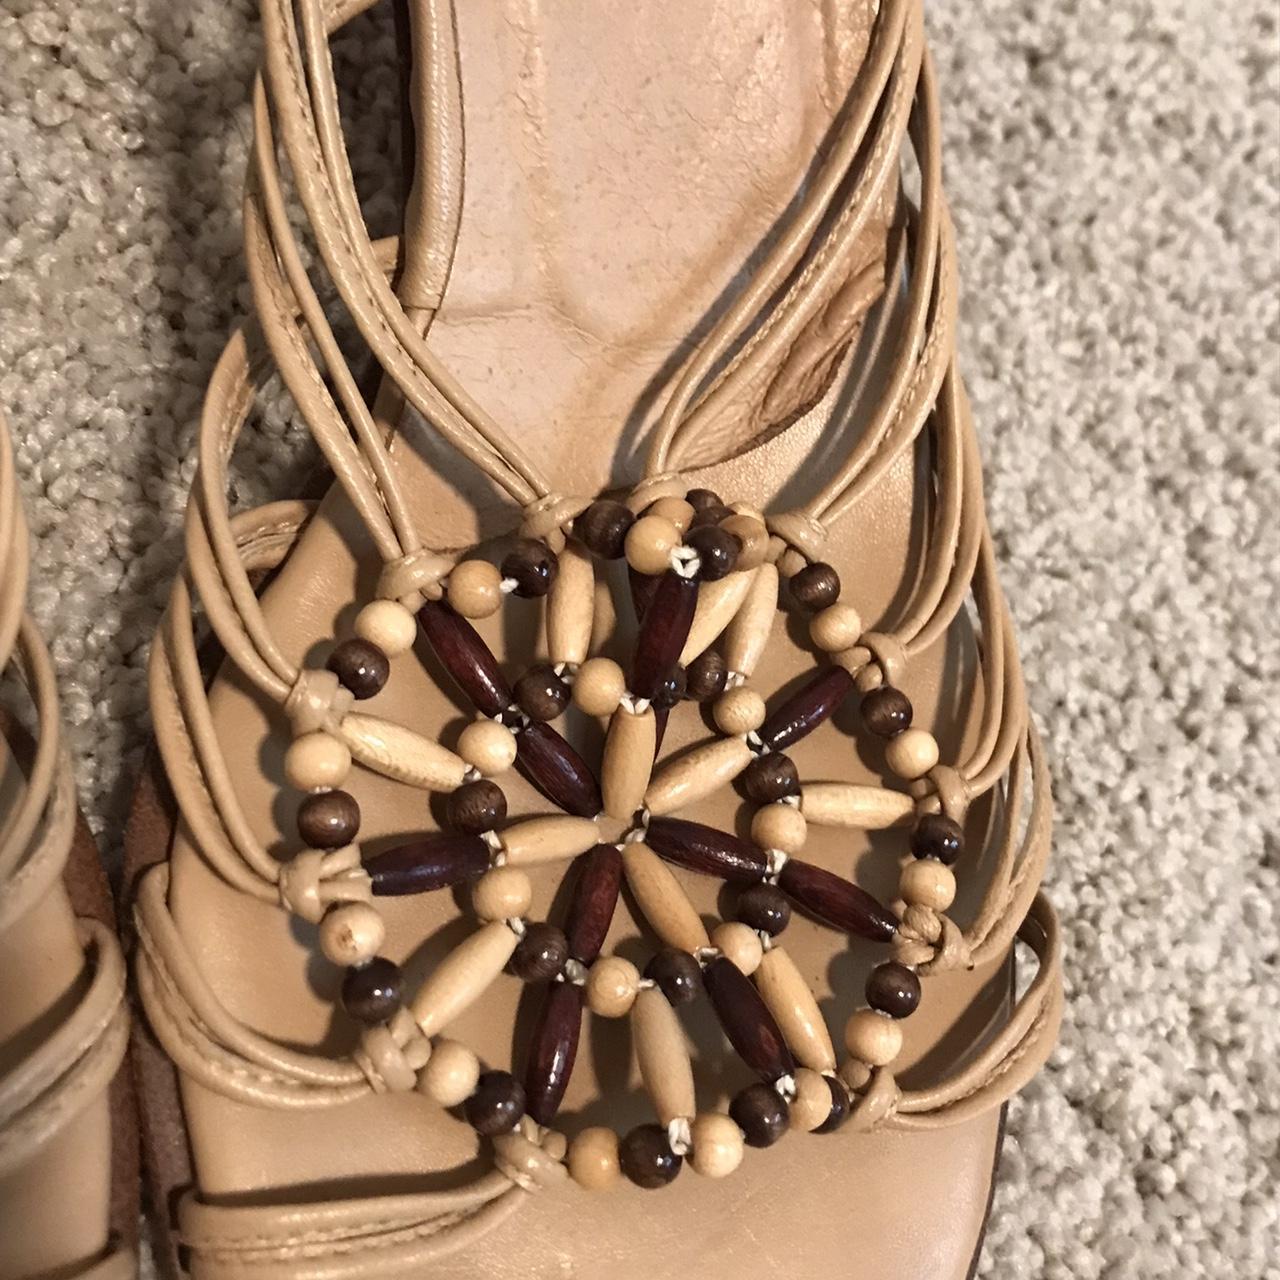 Tommy Bahama Women's Tan and Brown Courts (4)